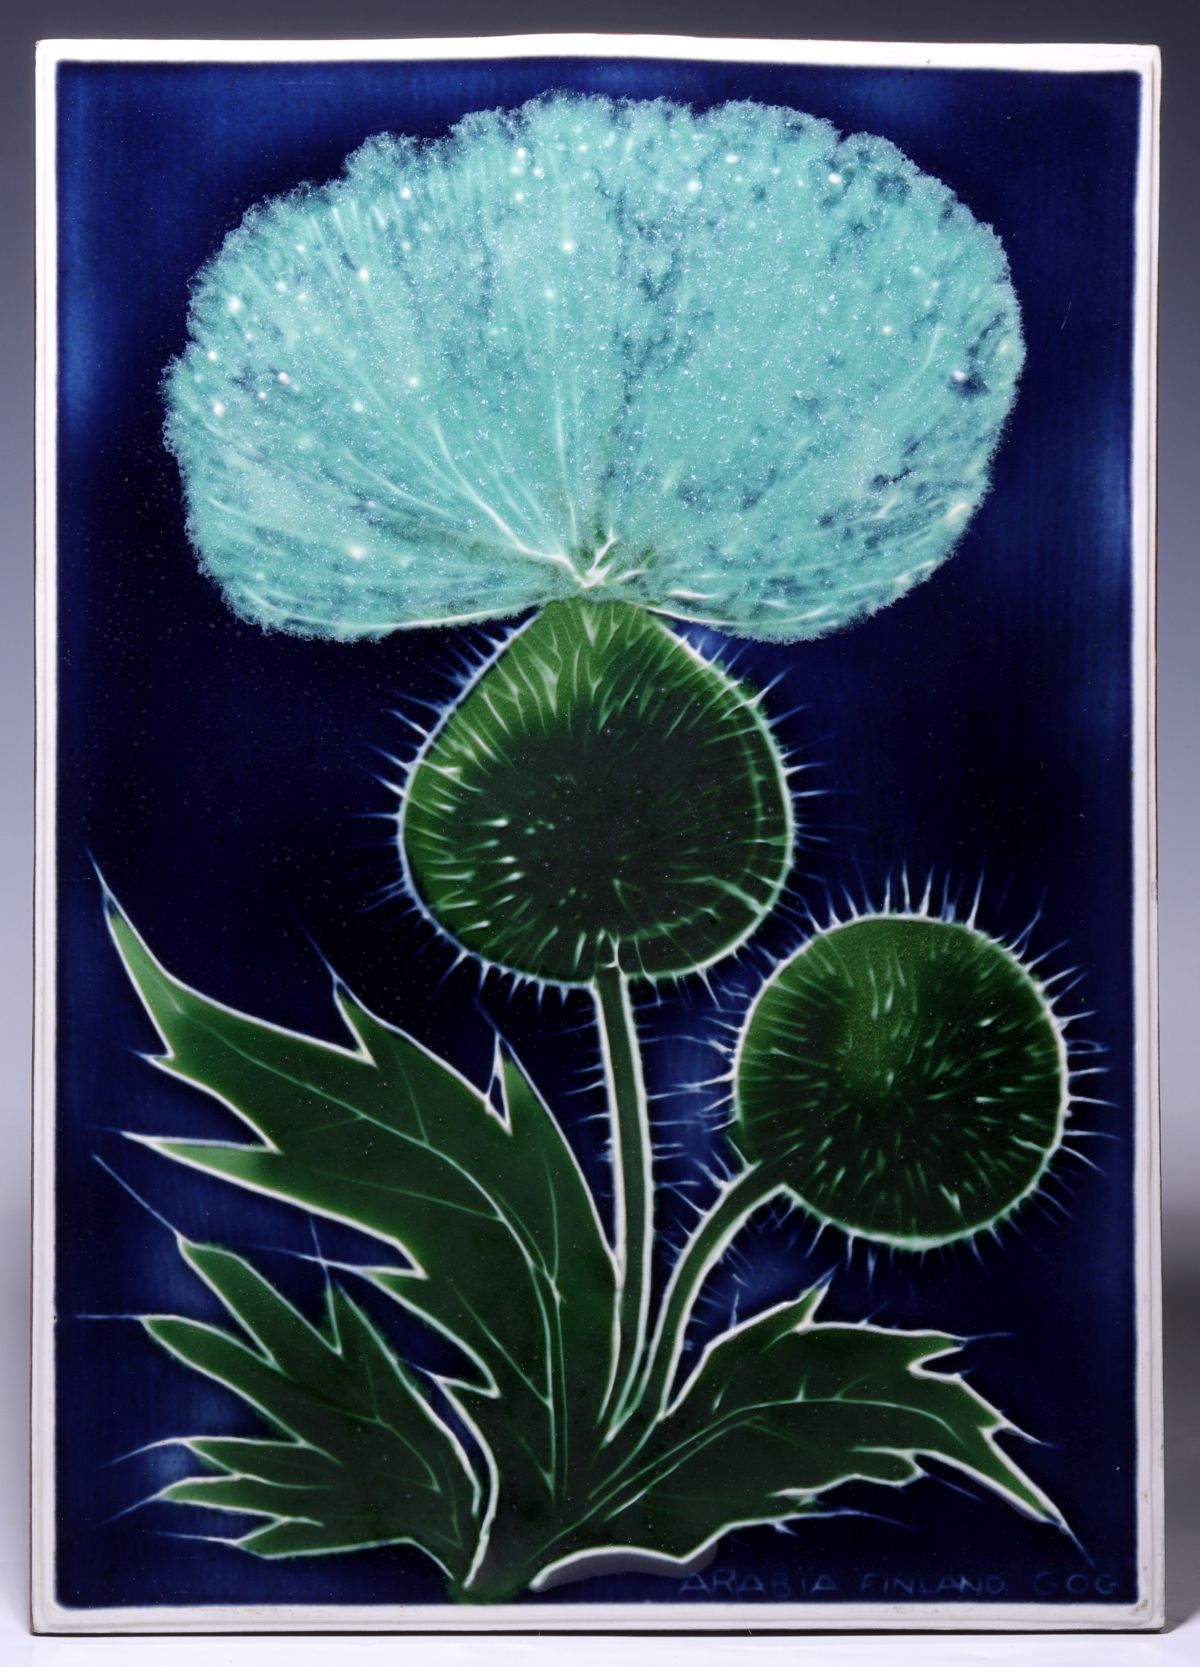 A LARGE ARABIA FINLAND PORCELAIN PLAQUE WITH THISTLE